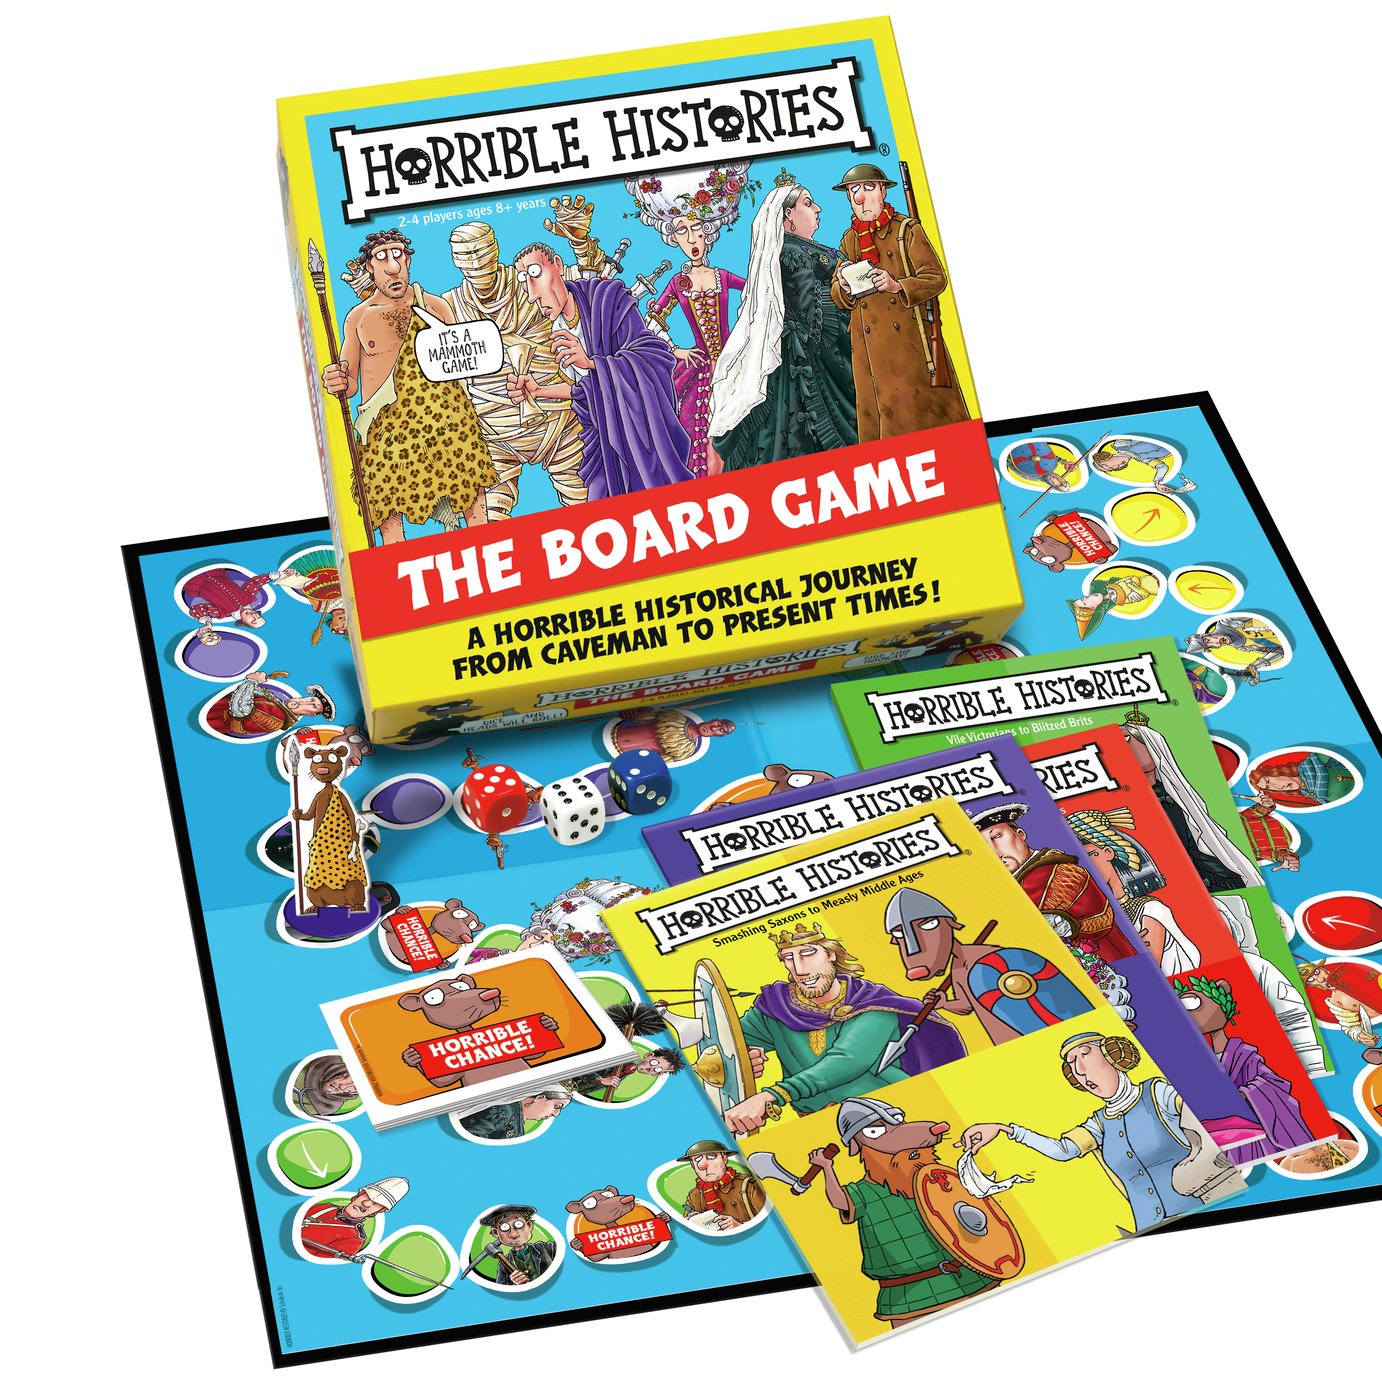 Horrible Histories Board Game review